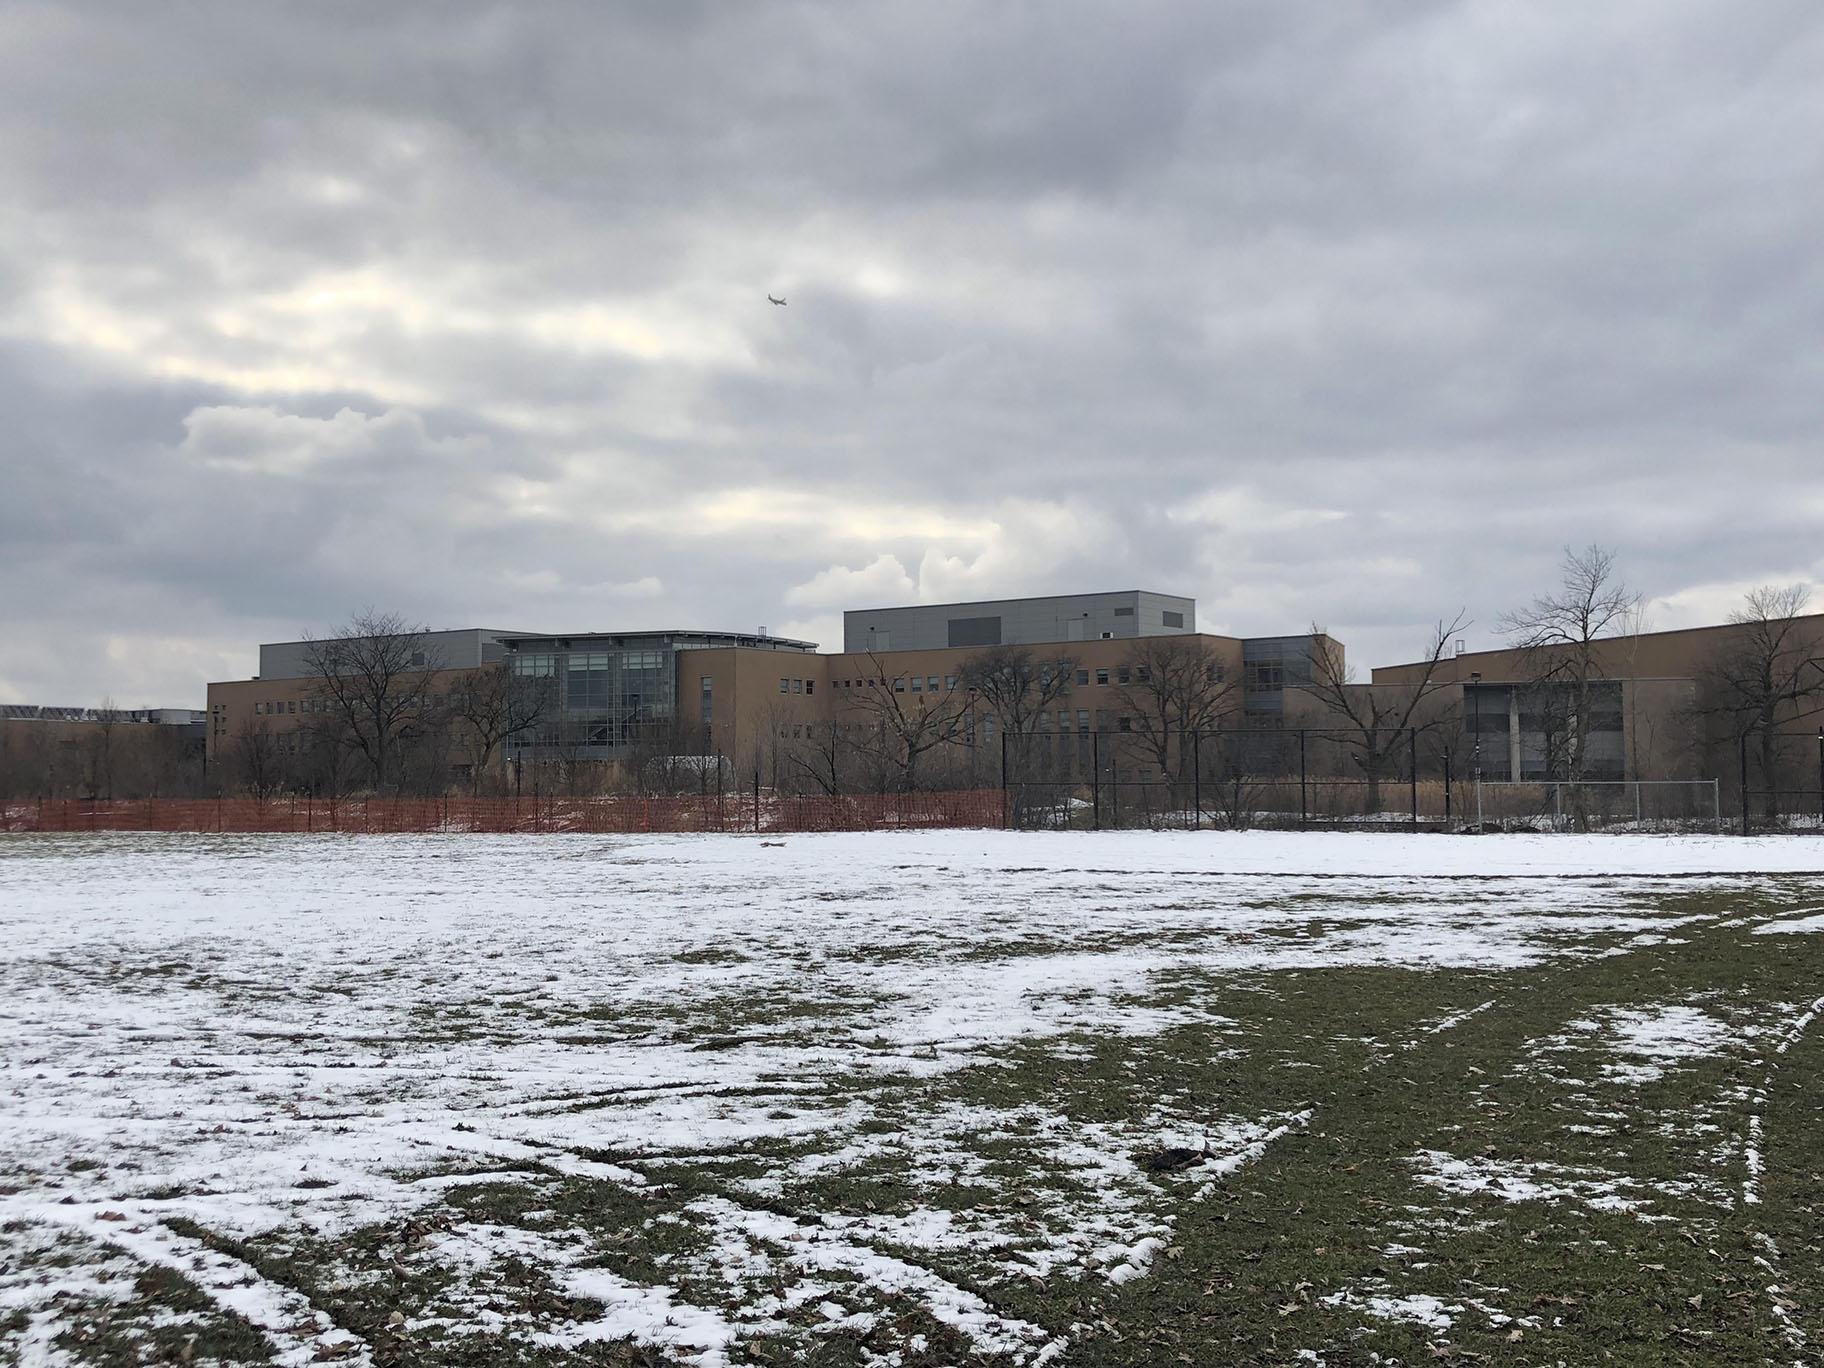 With a screen of foliage removed in Legion Park, residents now have a clear view of Northside College Prep, which some say looks like a factory. (Patty Wetli / WTTW News)